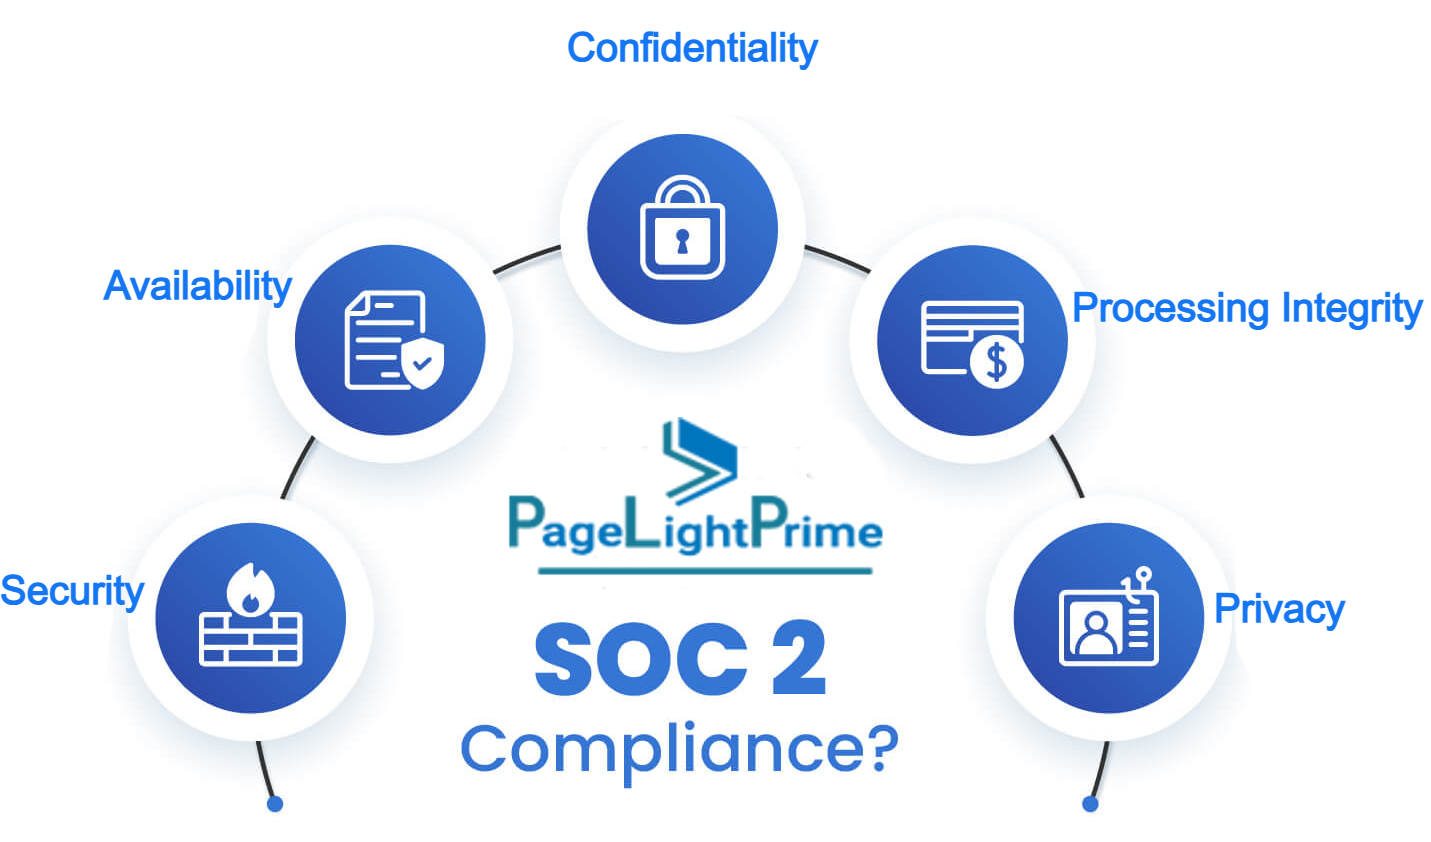 soc-2 compliance legal software